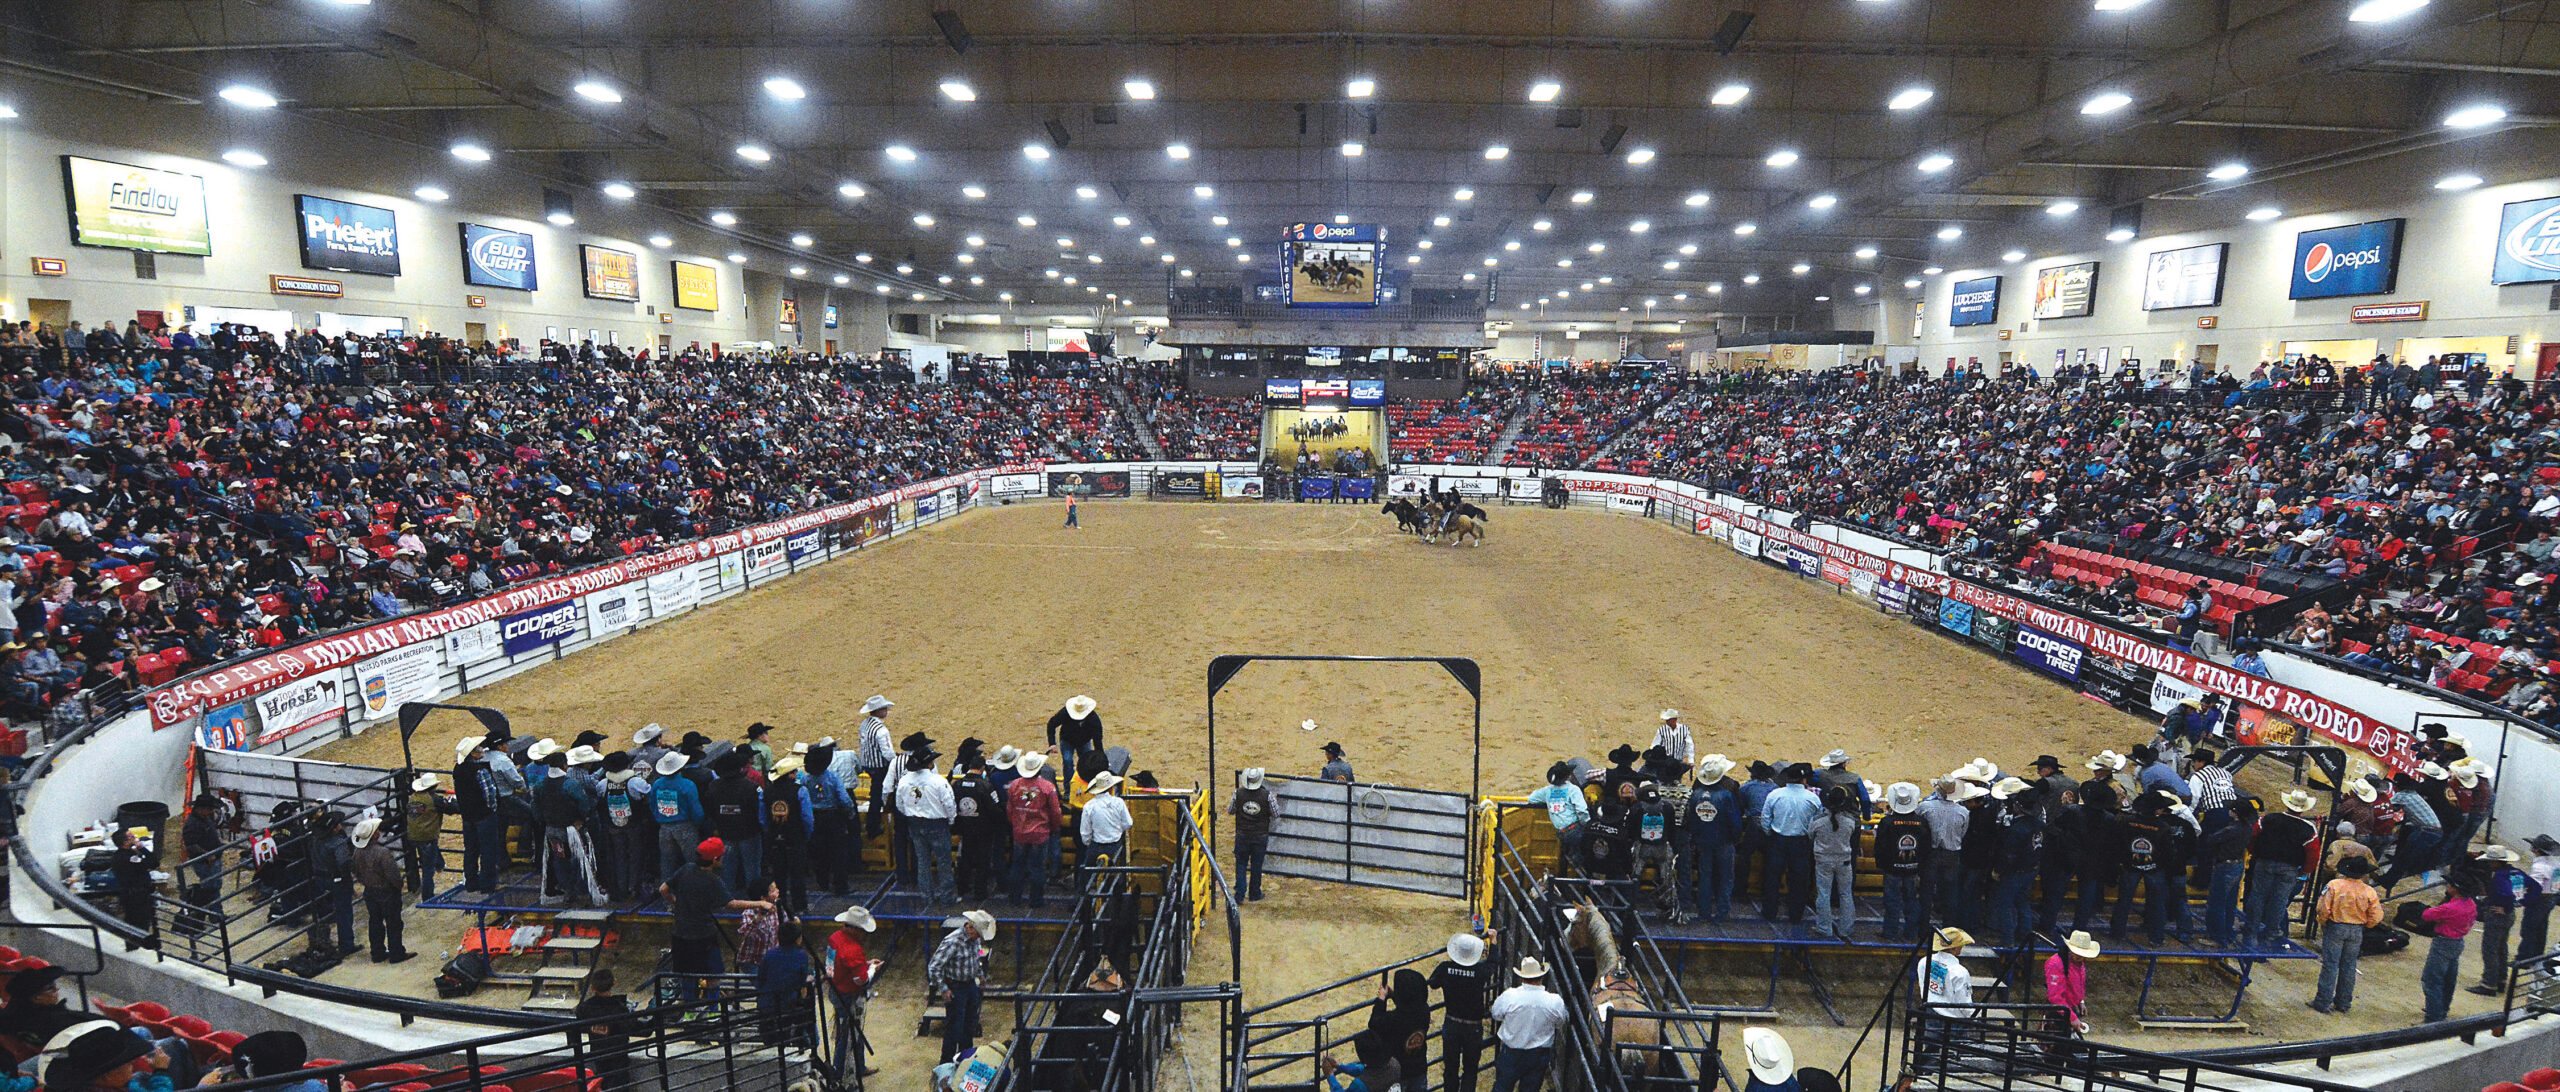 Indian National Finals Rodeo at South Point Casinos’s equestrian center